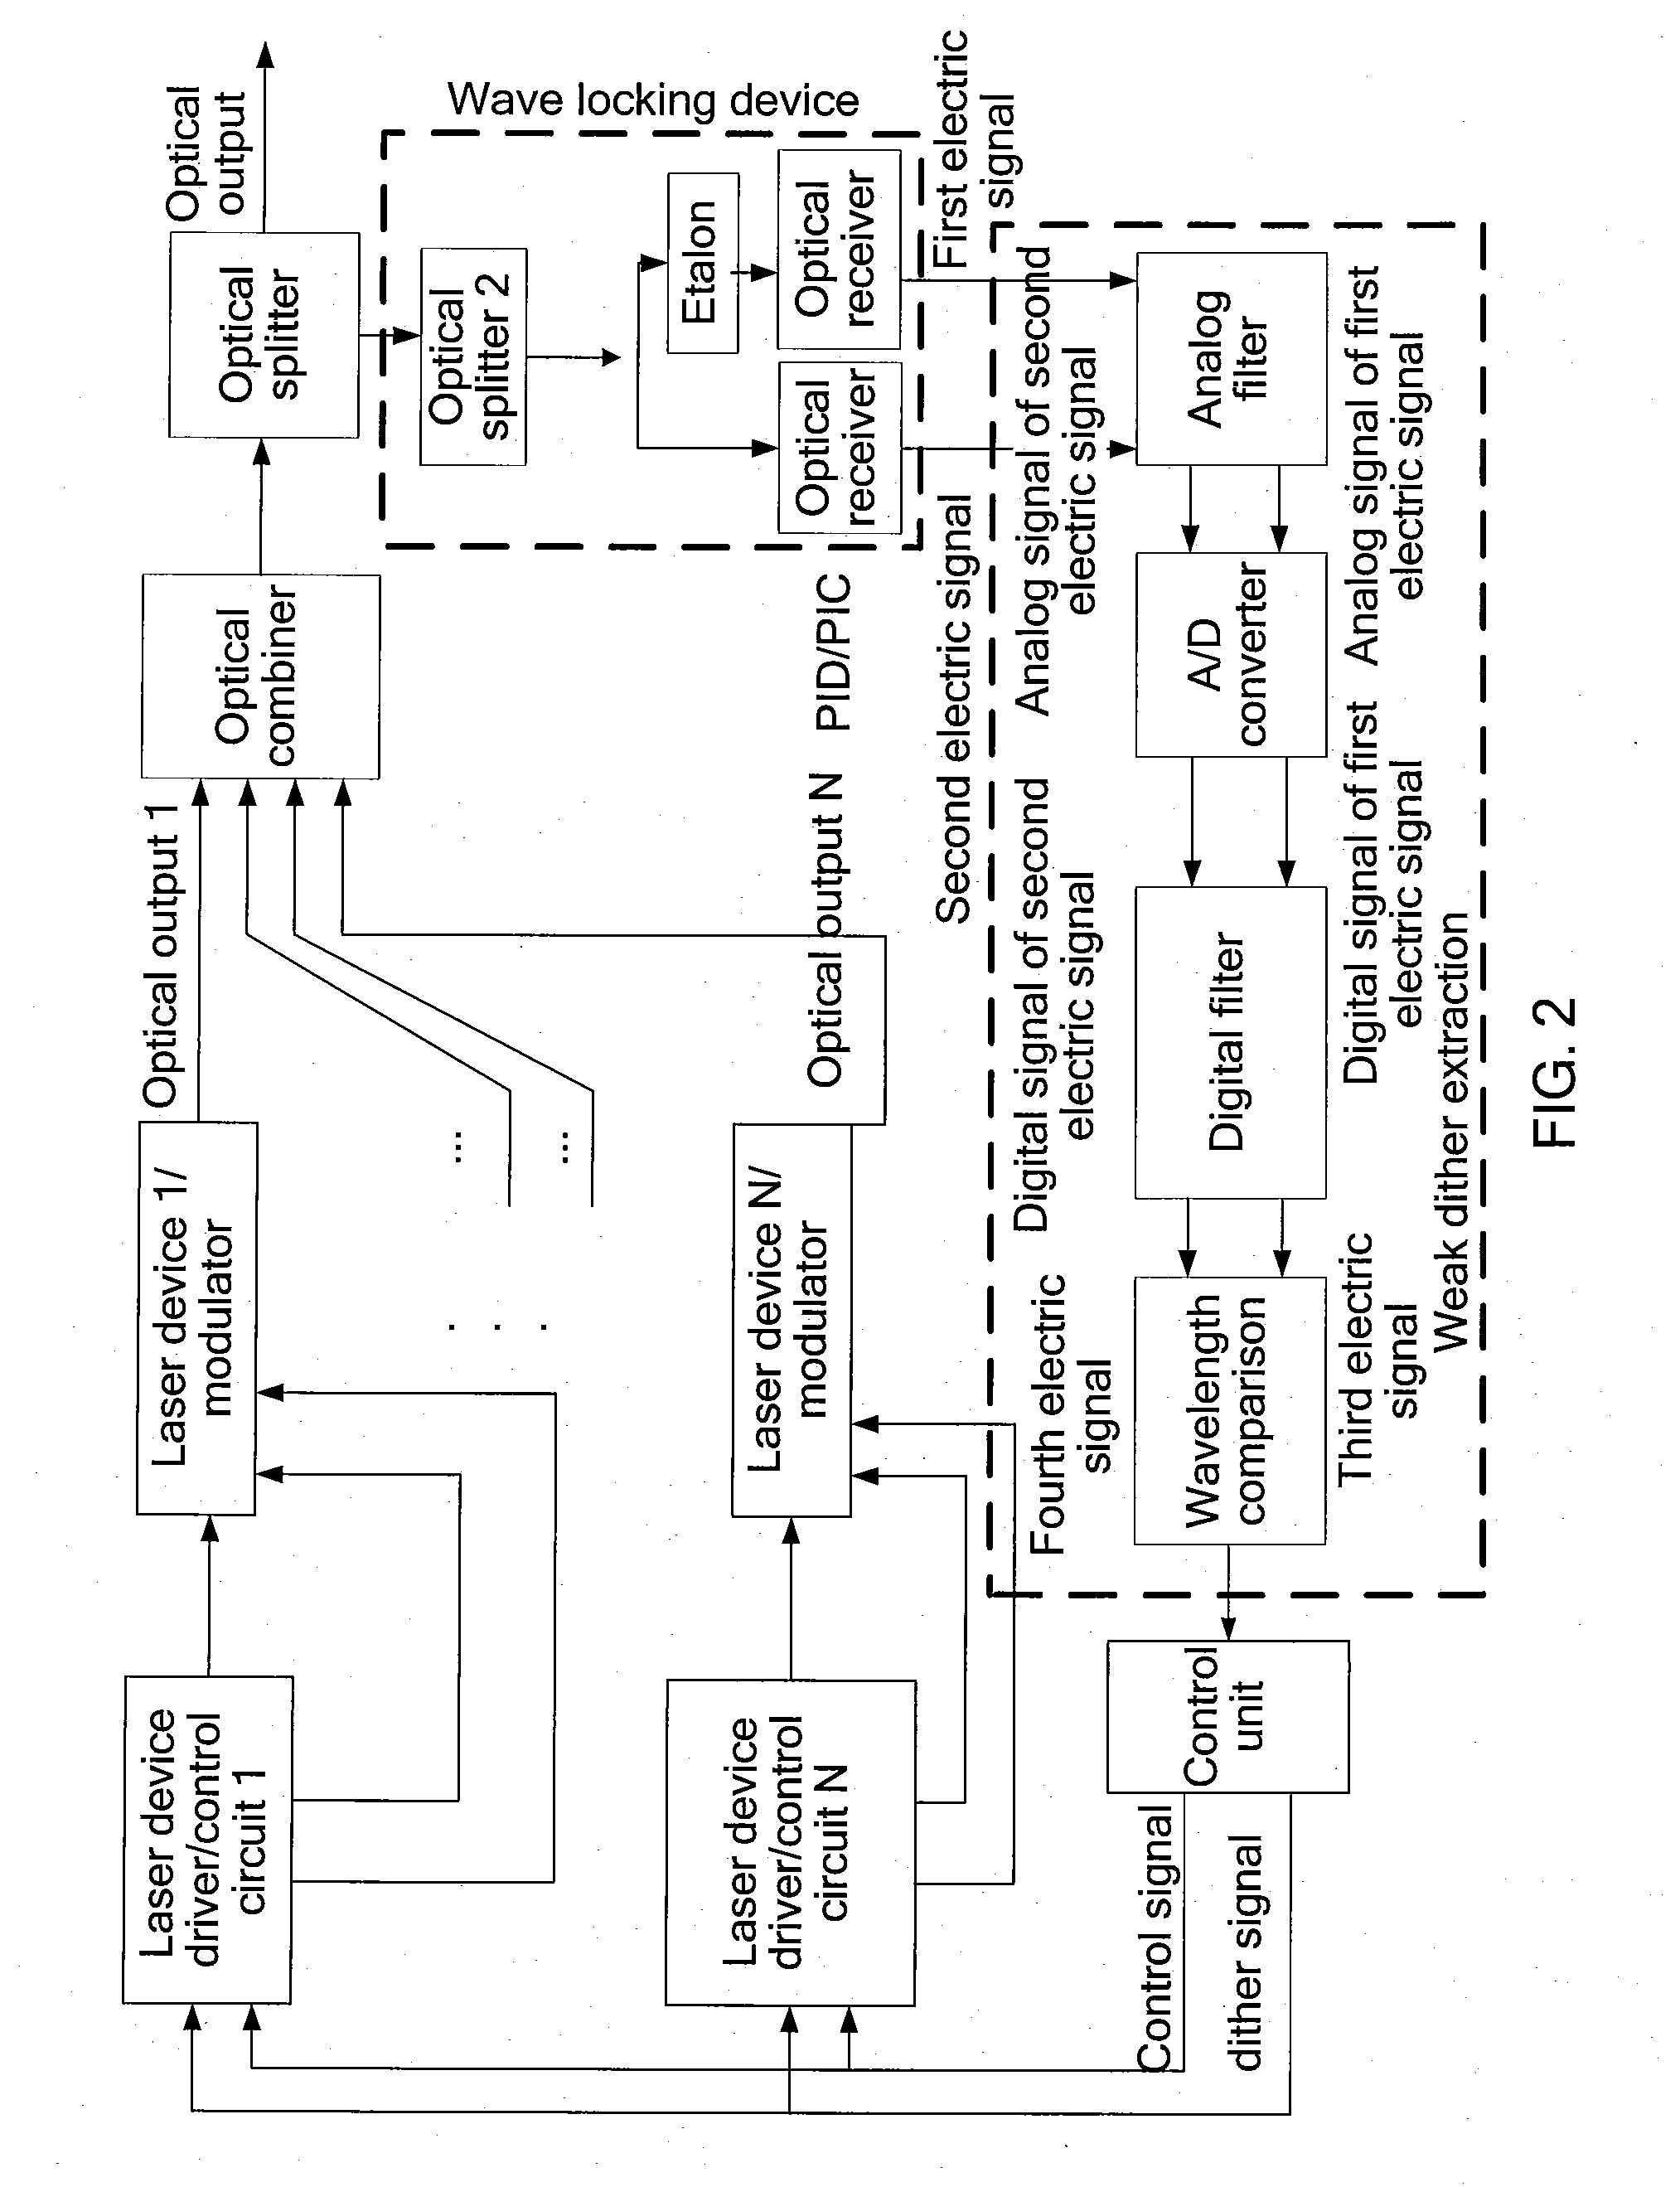 Method and apparatus for filtering locking